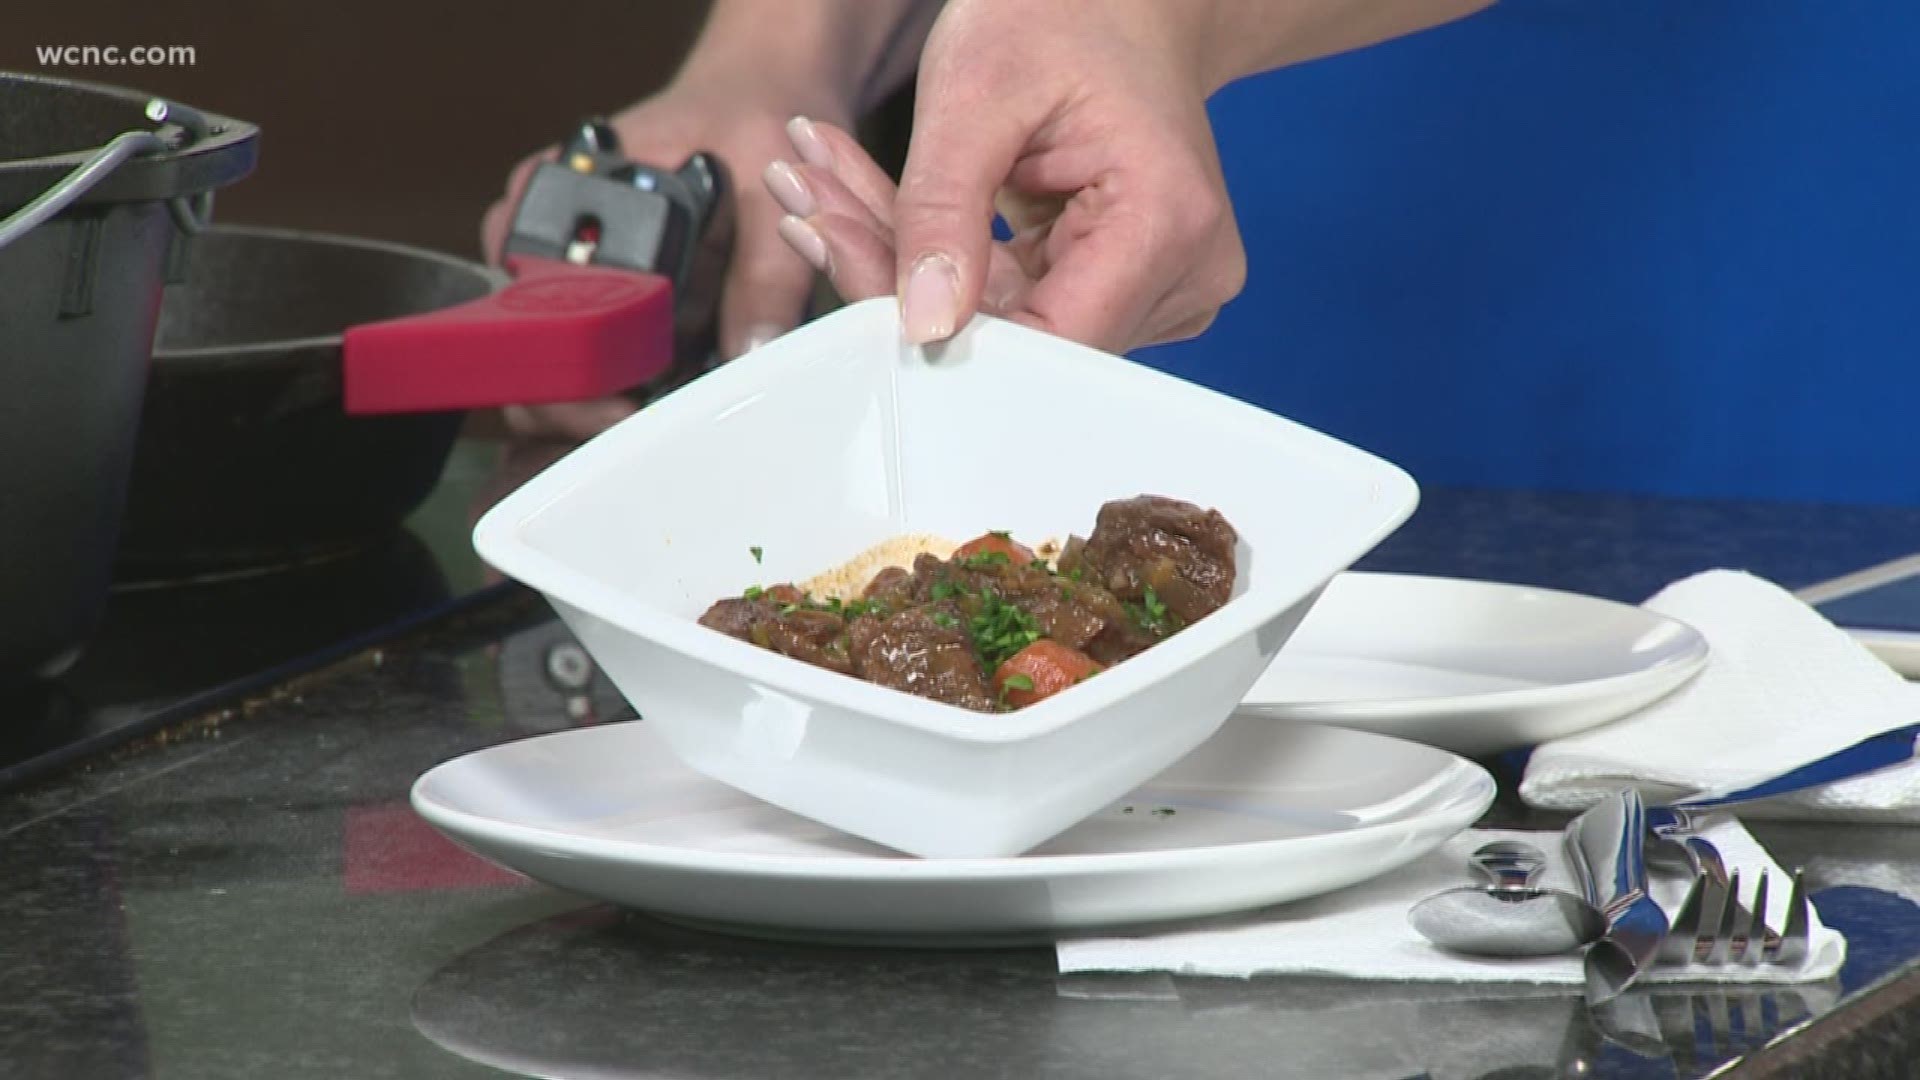 Chef Nikki Moore shows us how to build flavor in a stew.